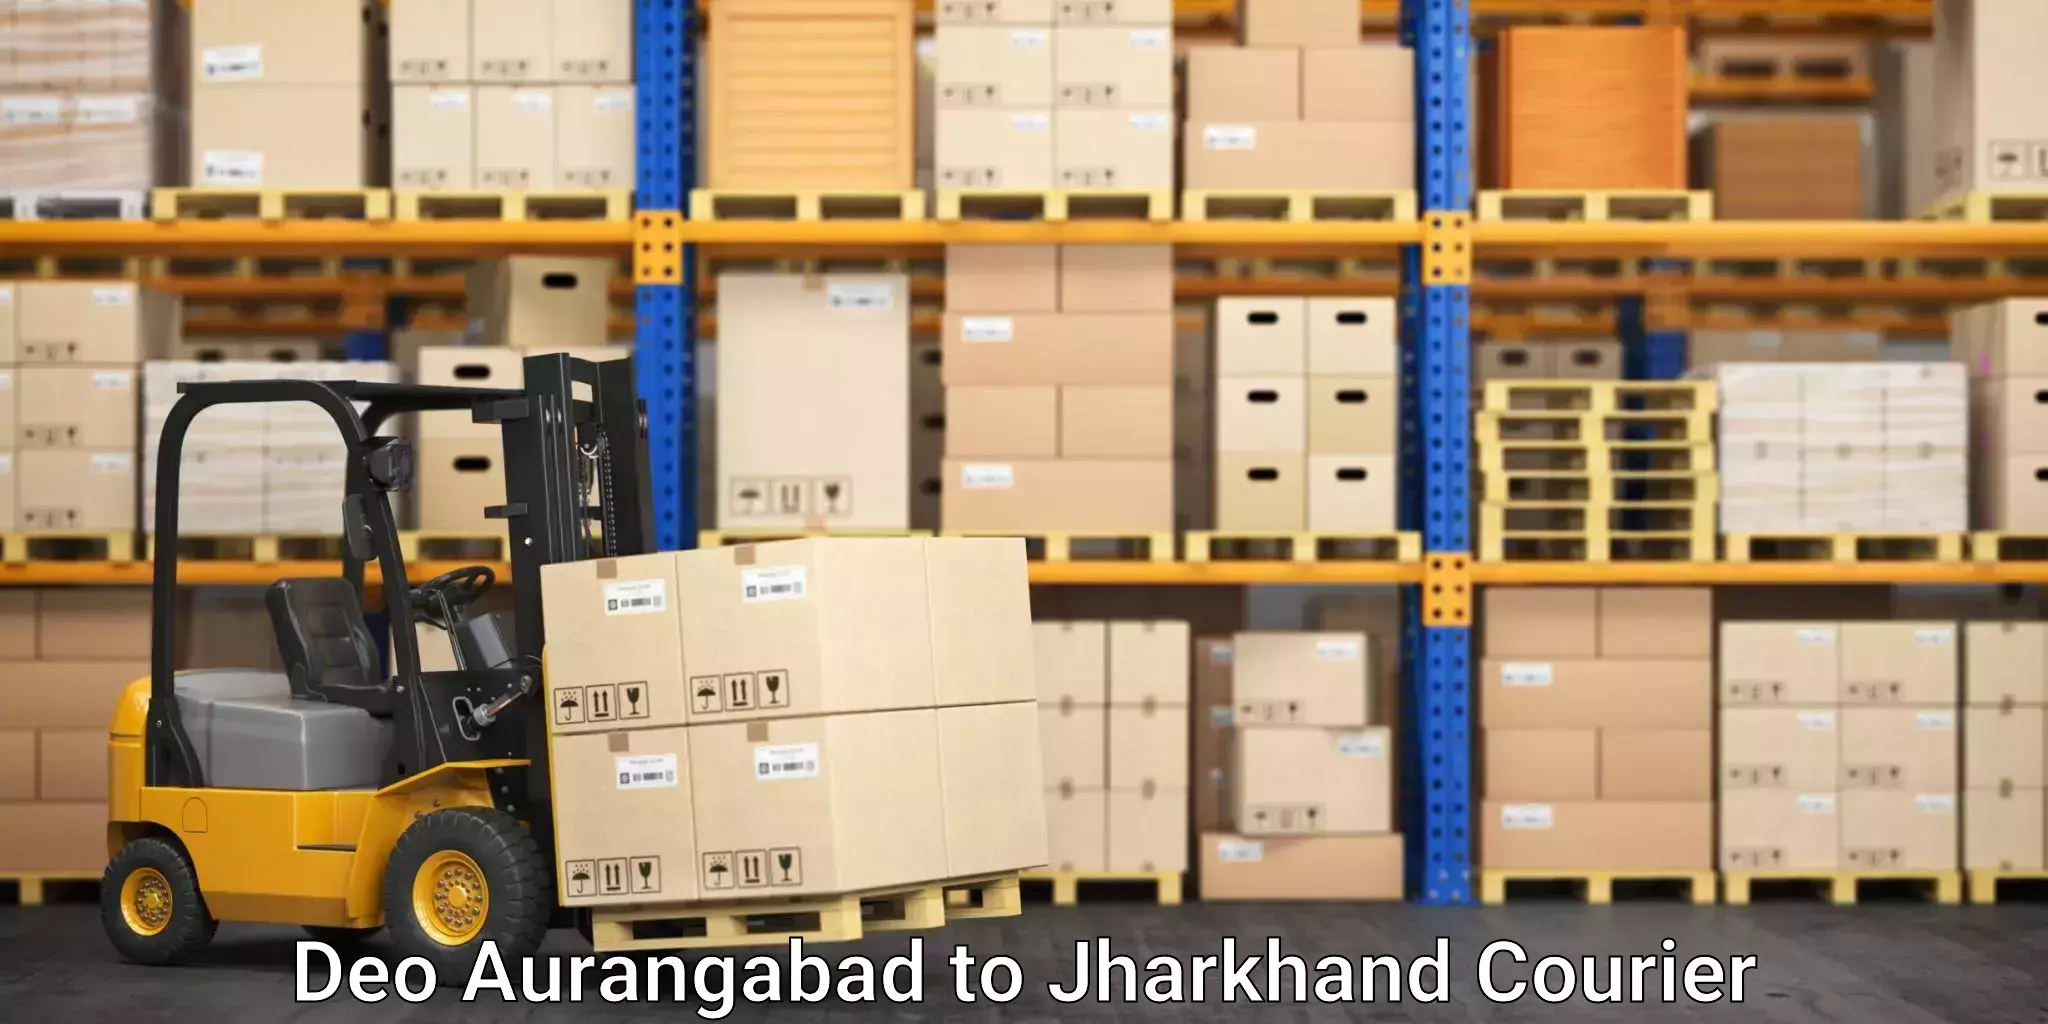 Reliable moving assistance Deo Aurangabad to Seraikella